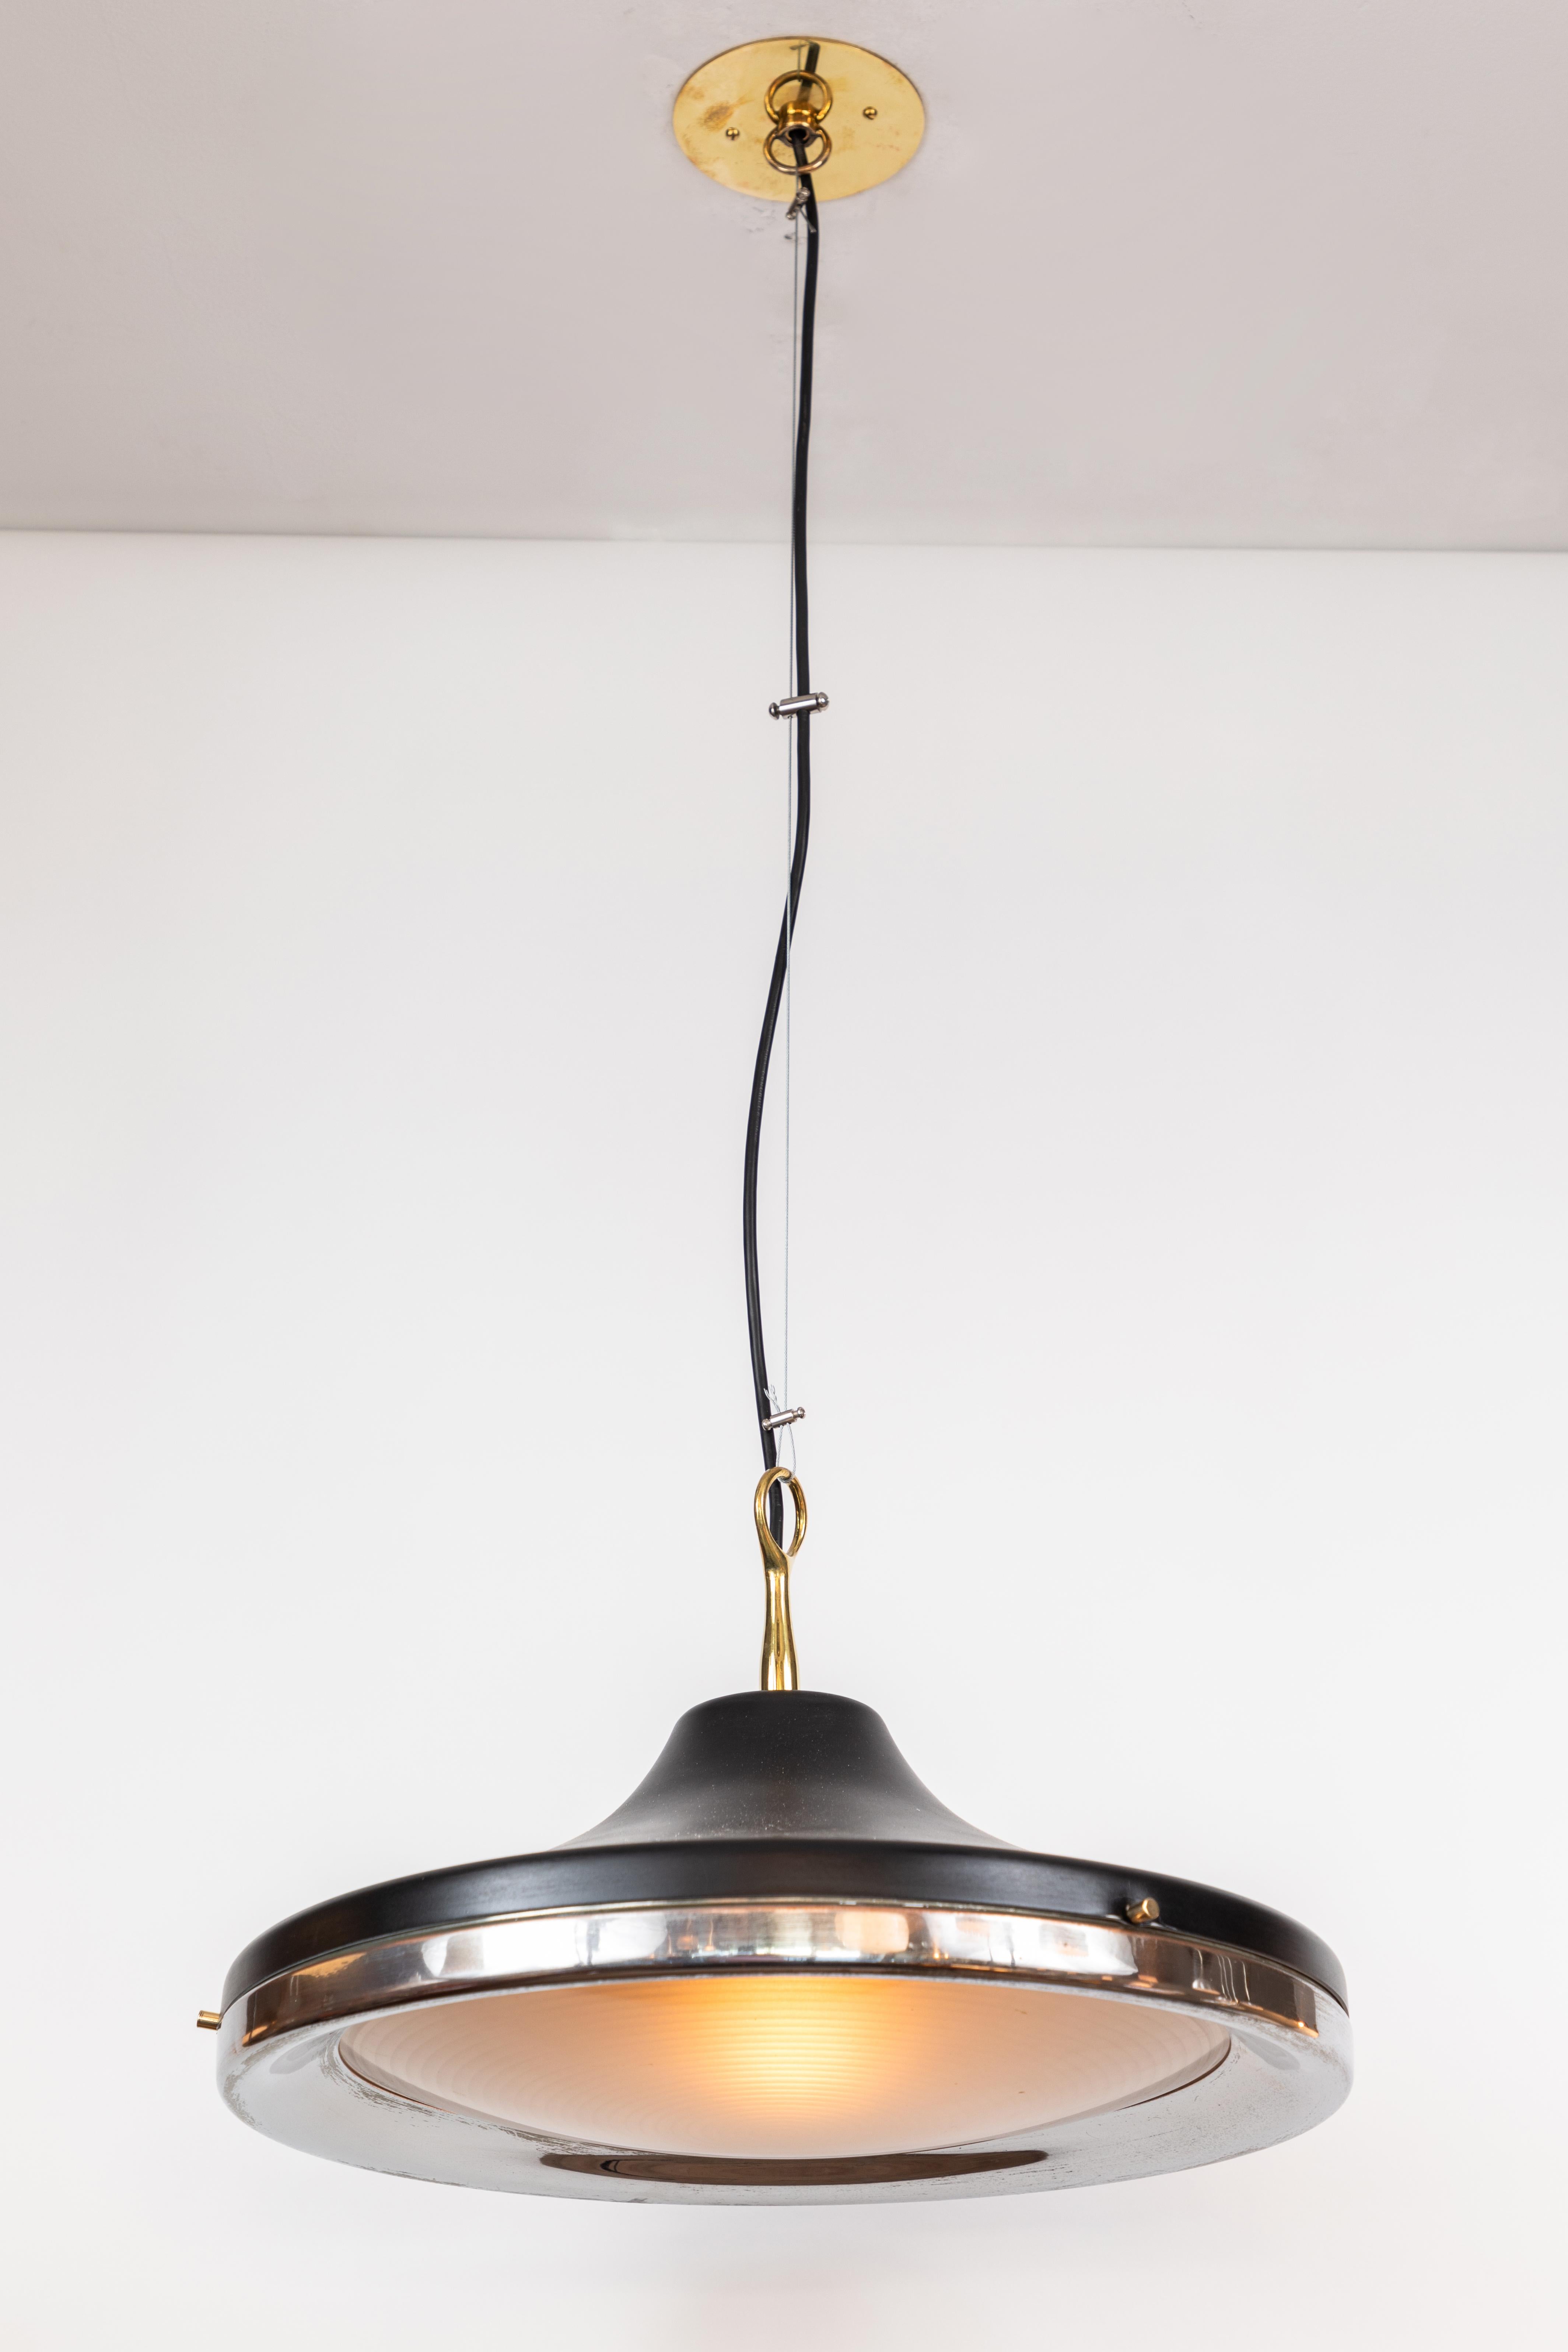 1960s Italian glass and metal pendant in the style of Gino Sarfatti. Executed in nickeled brass, pressed opaline glass and black painted metal. A simple and refined piece characteristic of 1960s Italian design at its highest level.

Professionally